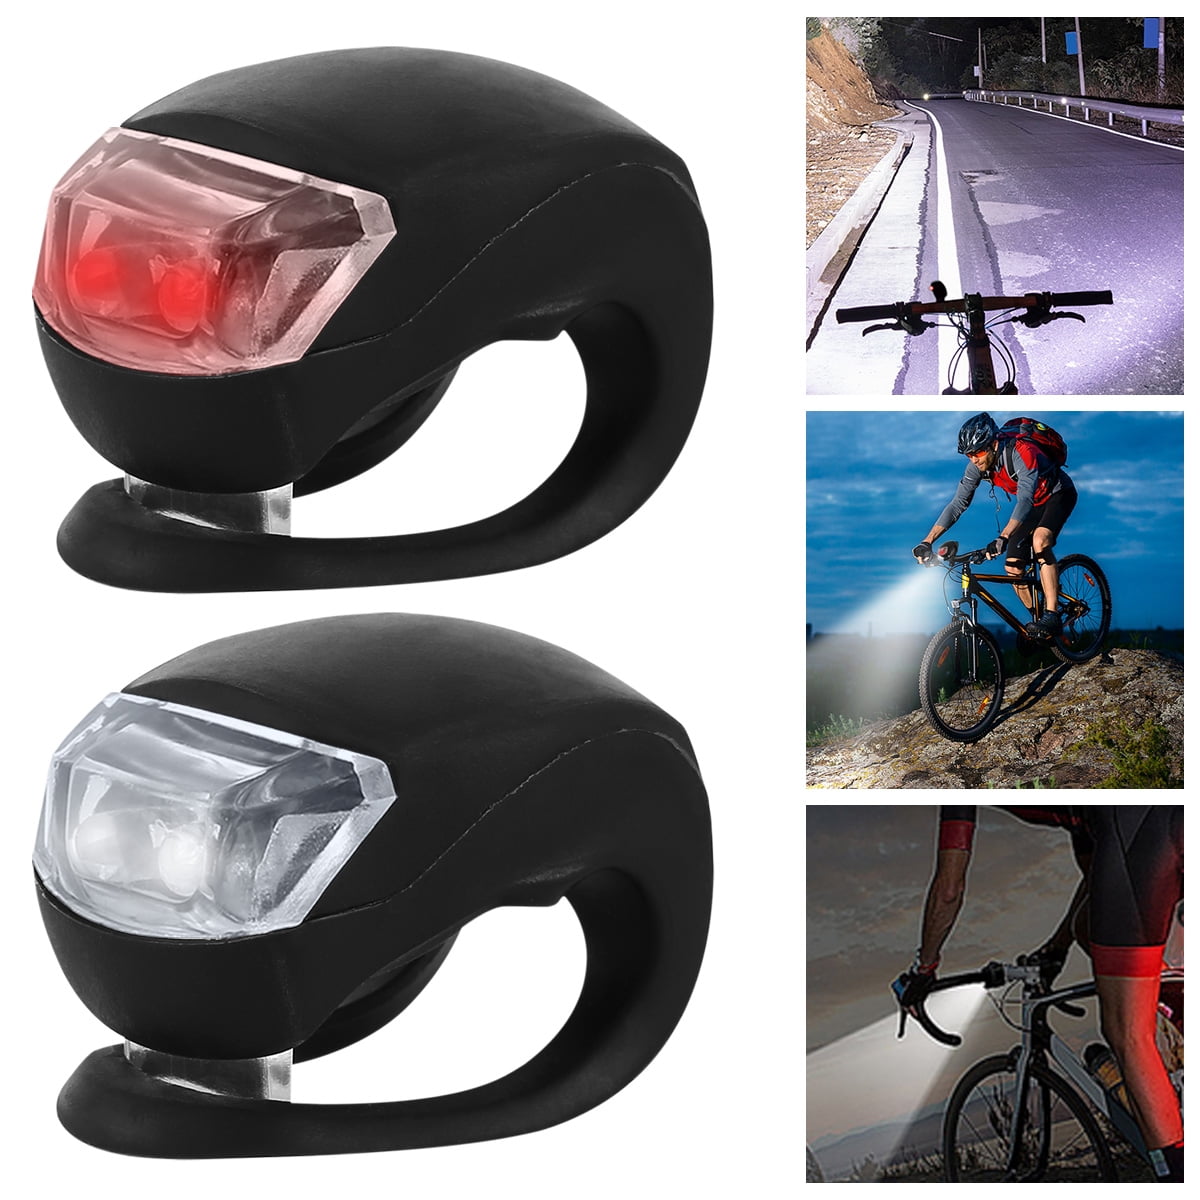 LED High Brightness Bike Tail Light is Water-Resistant & Easy to Install for Kids Men W USB Rechargeable Bike Lights Bicycle Lights Front and Back,Super Bright high Lumens Bike Headlight 